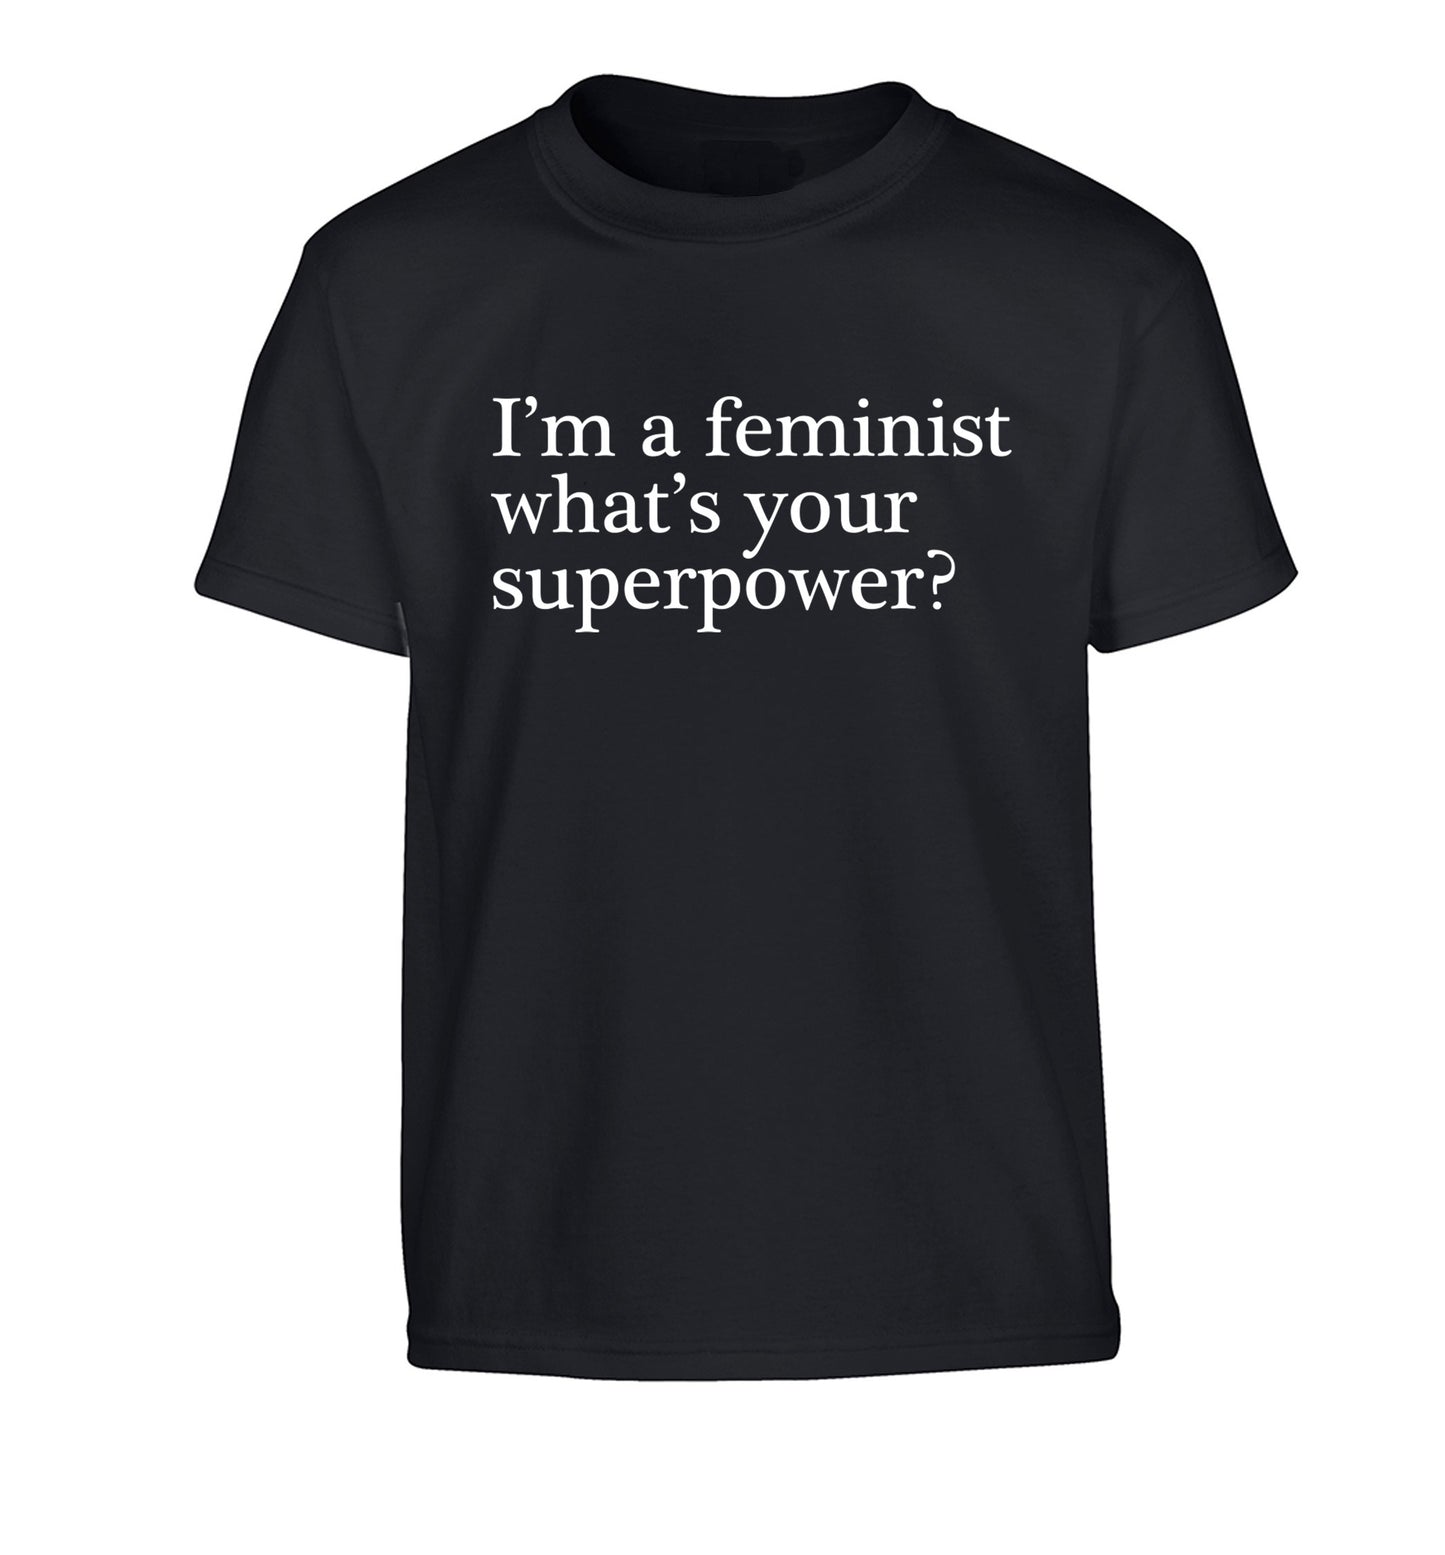 I'm a feminist what's your superpower? Children's black Tshirt 12-14 Years